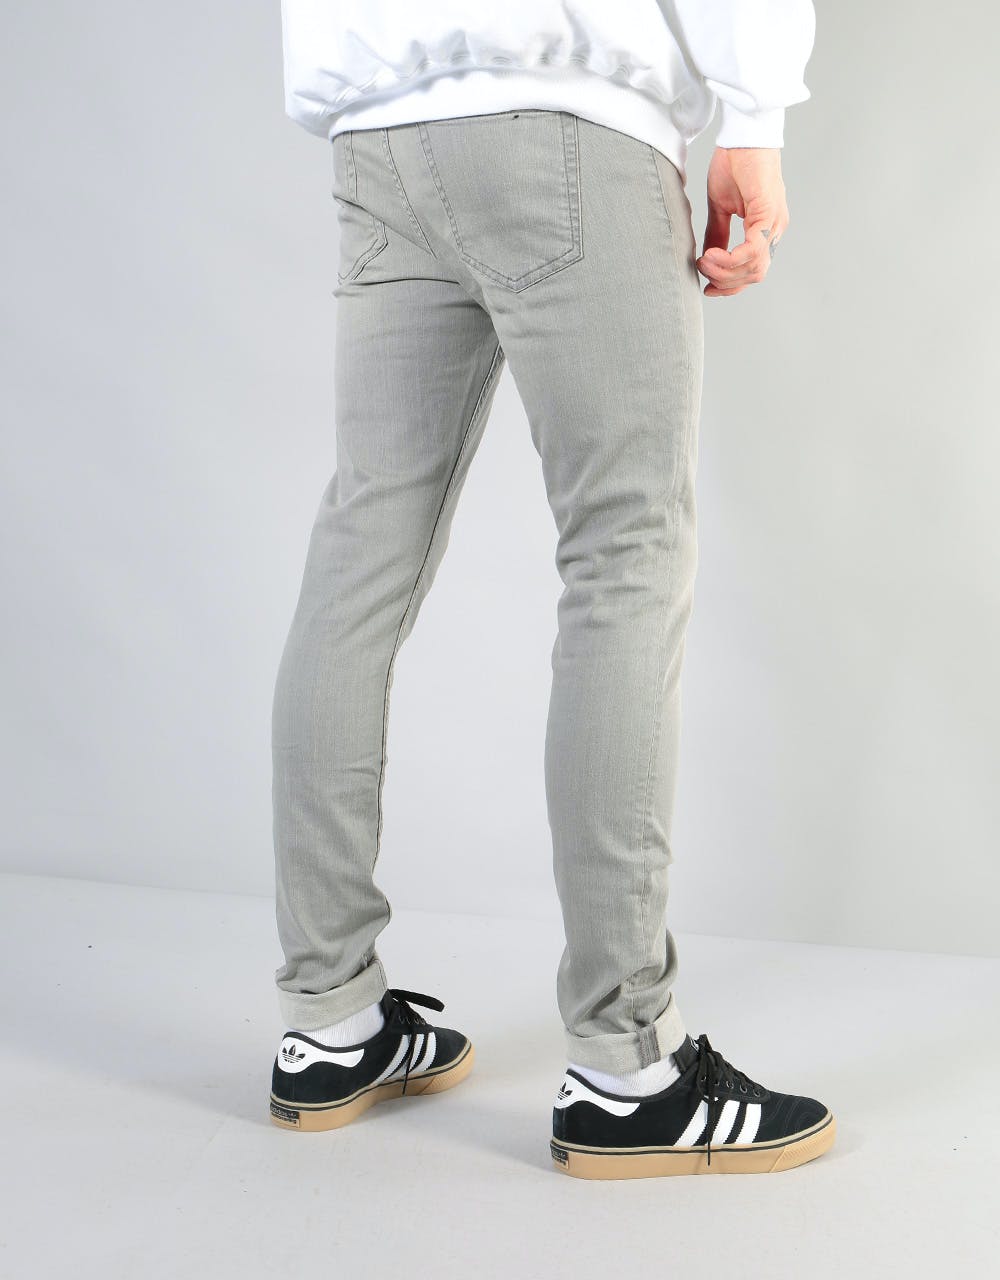 Route One Skinny Denim Jeans - Washed Grey